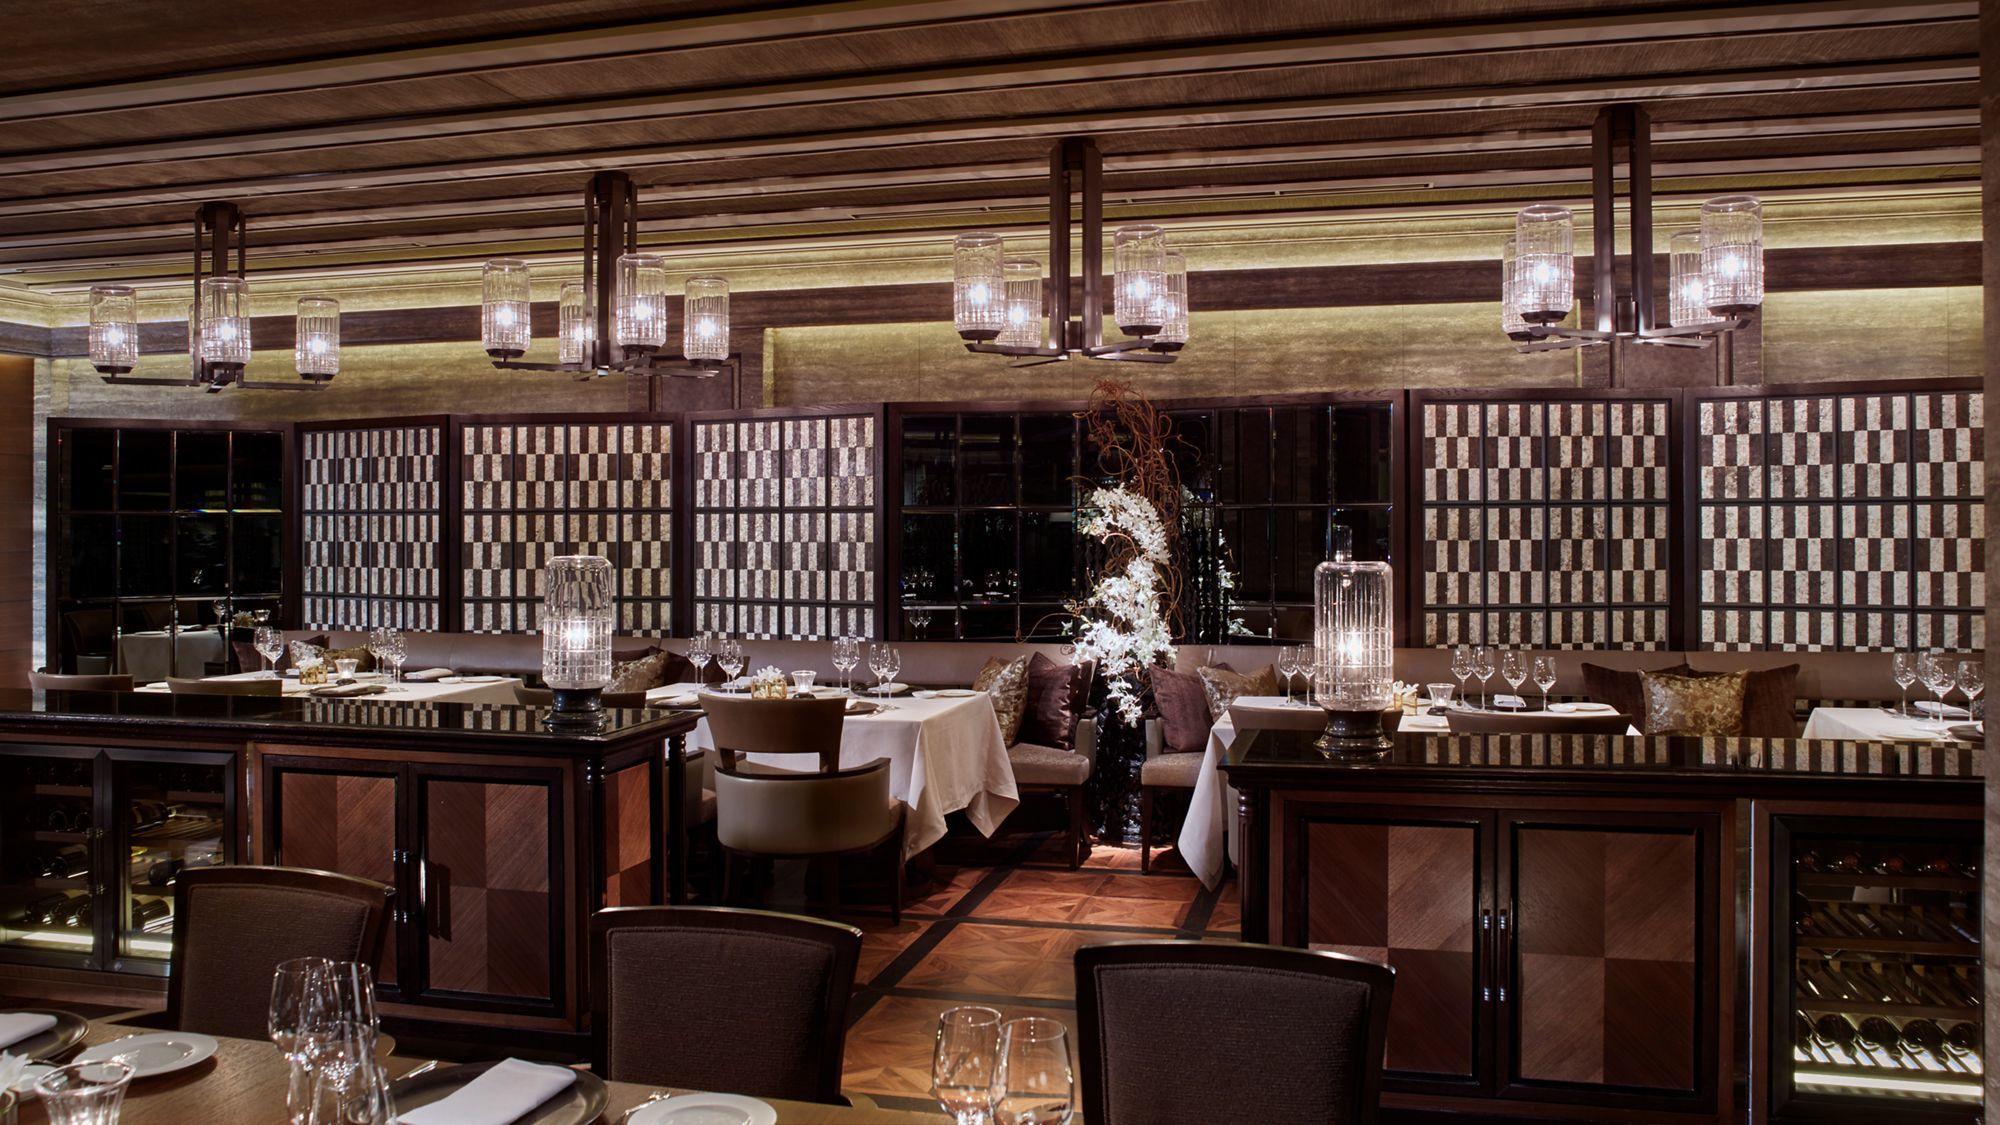 SKYCITY Grand Hotel: This is Gusto's private dining room